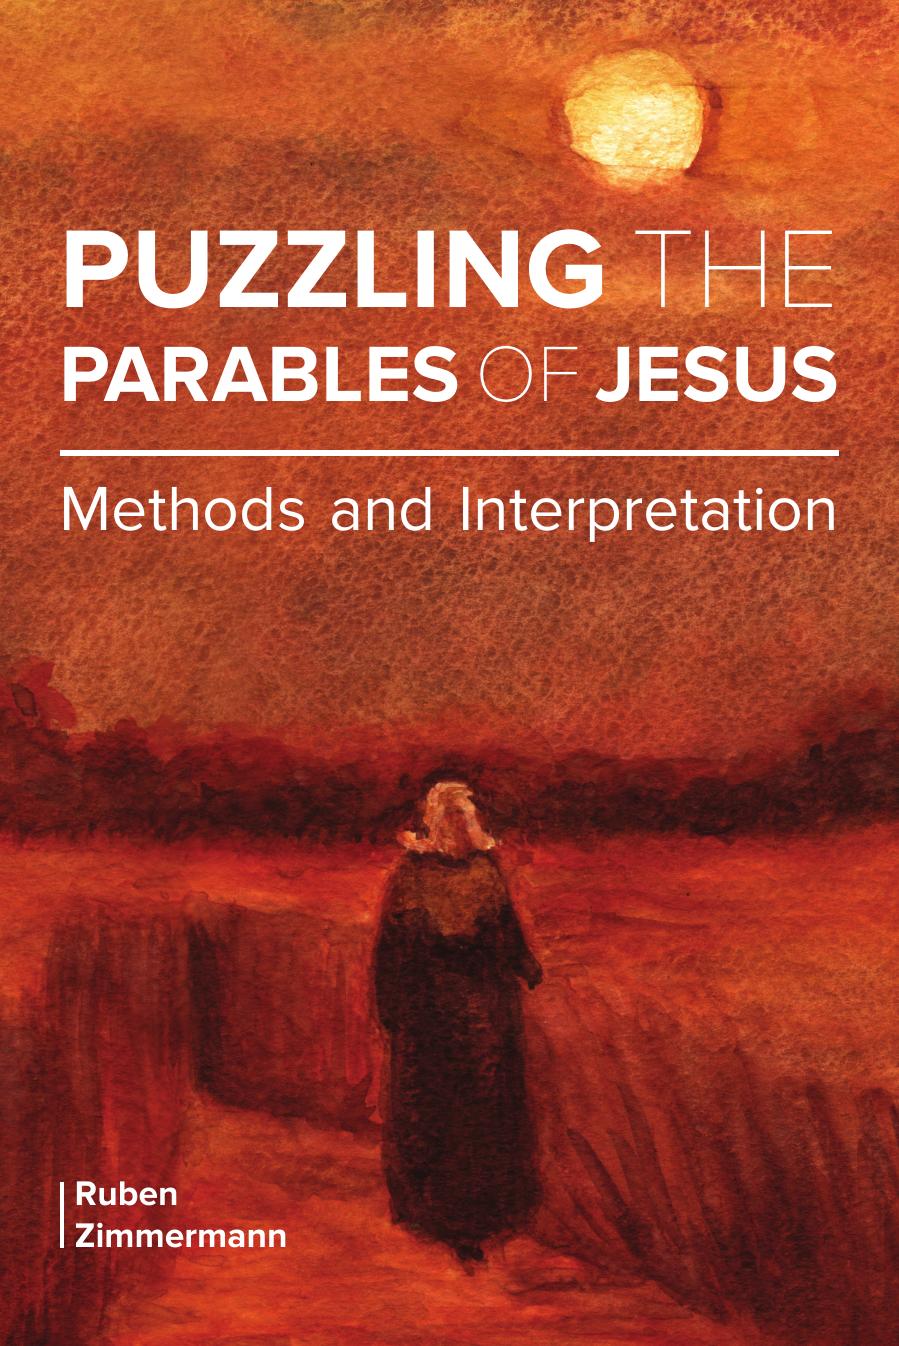 Puzzling the Parables of Jesus  Methods and Interpretation-Fortress Press (2015)